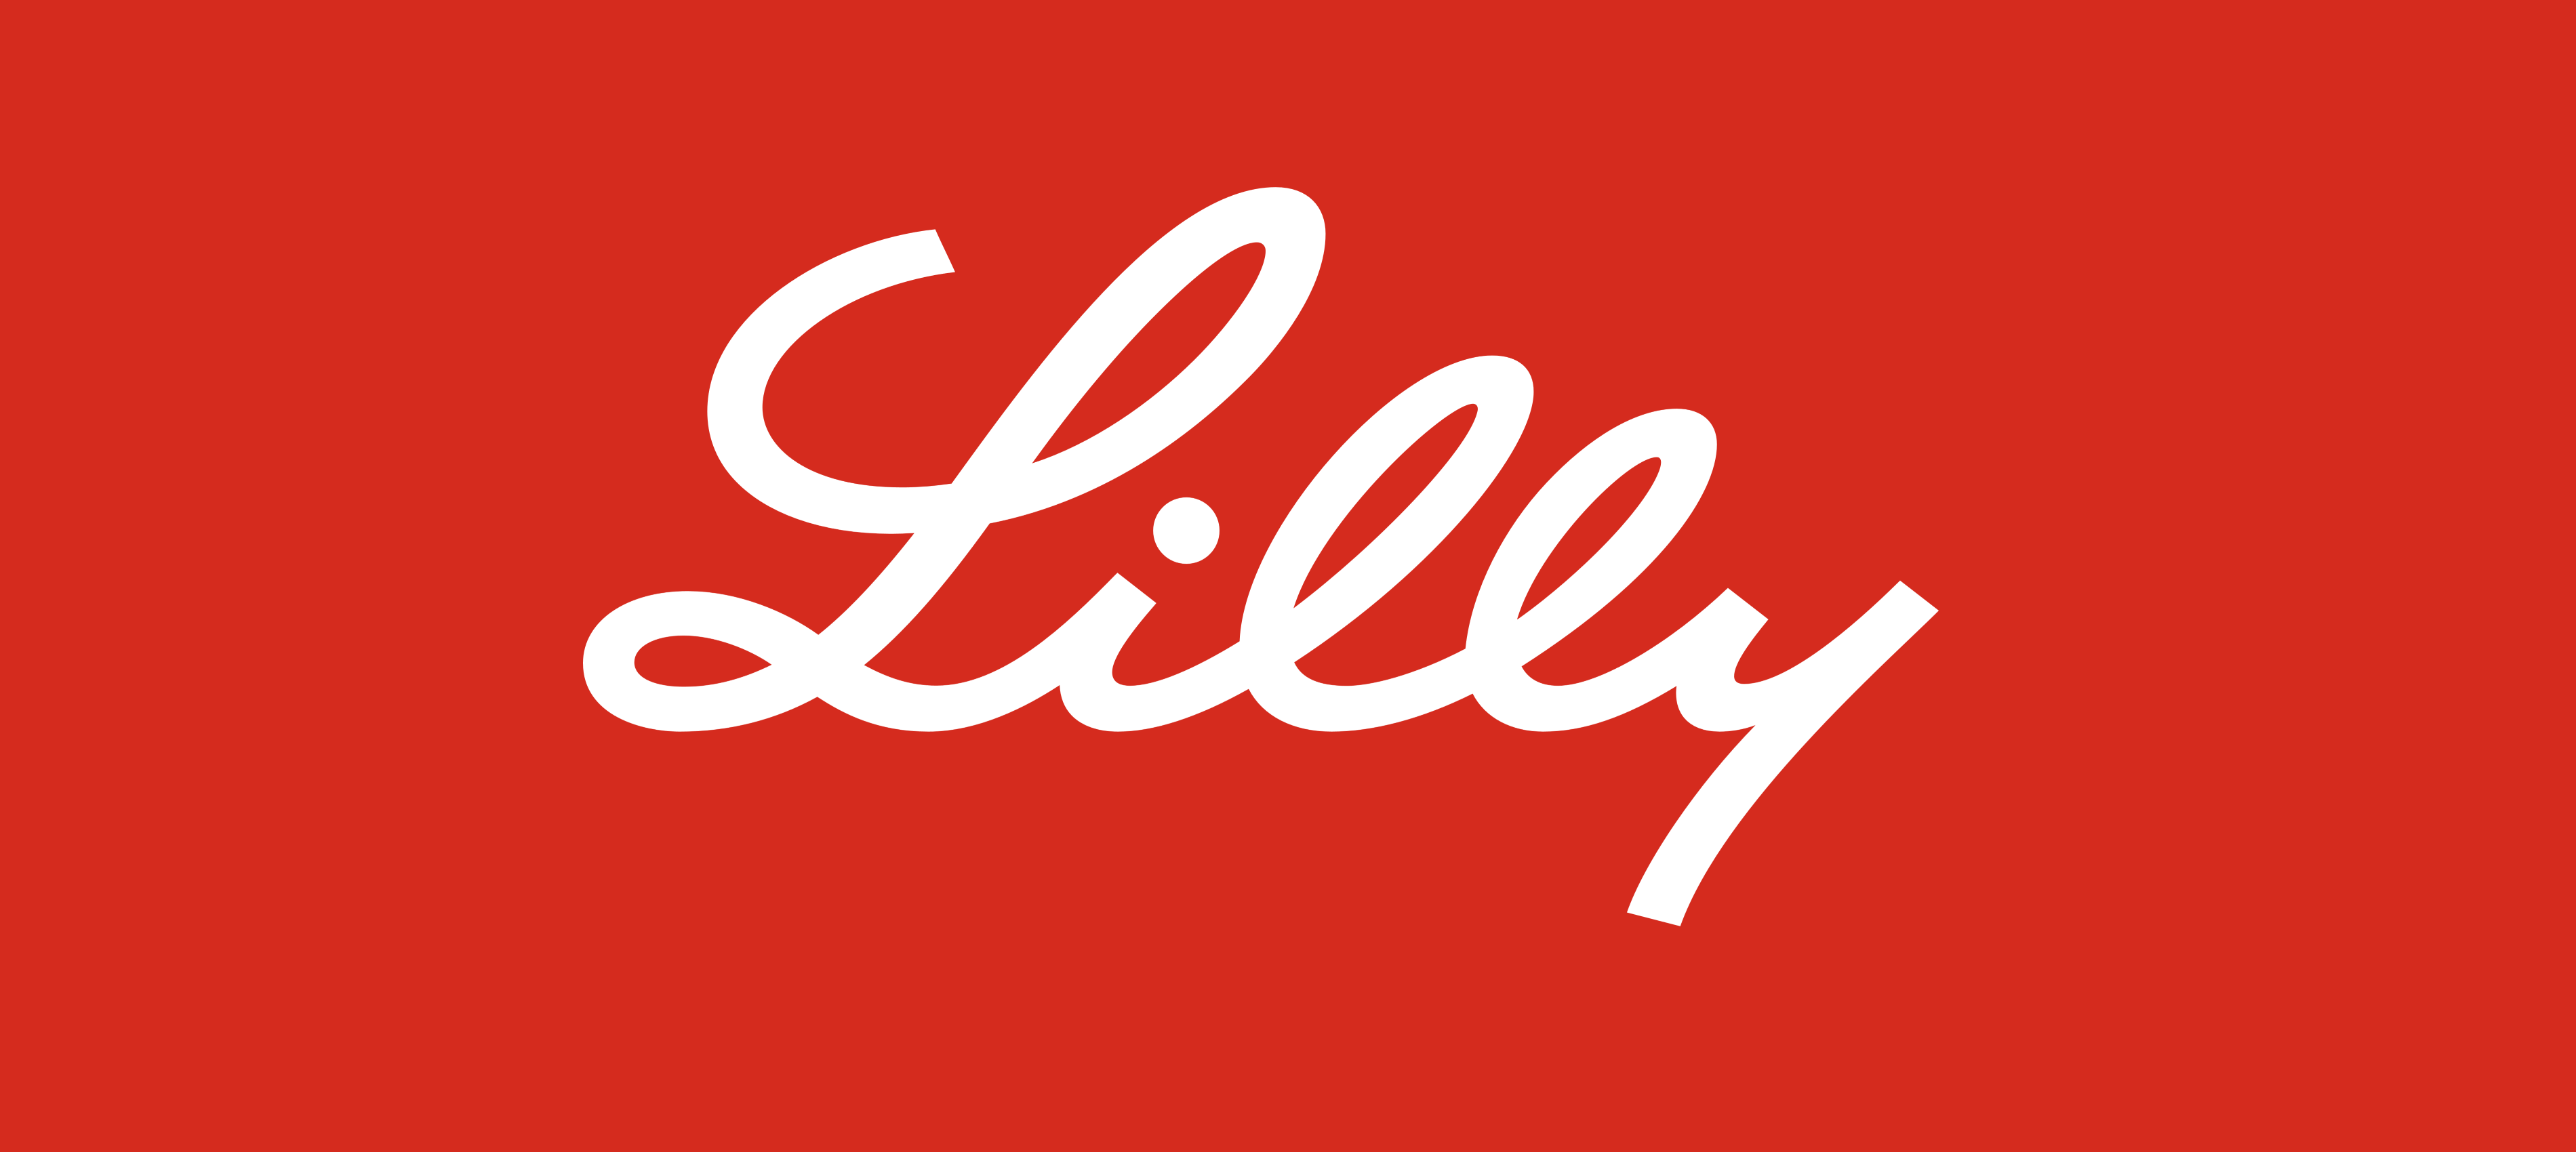 Lilly – Logos Download